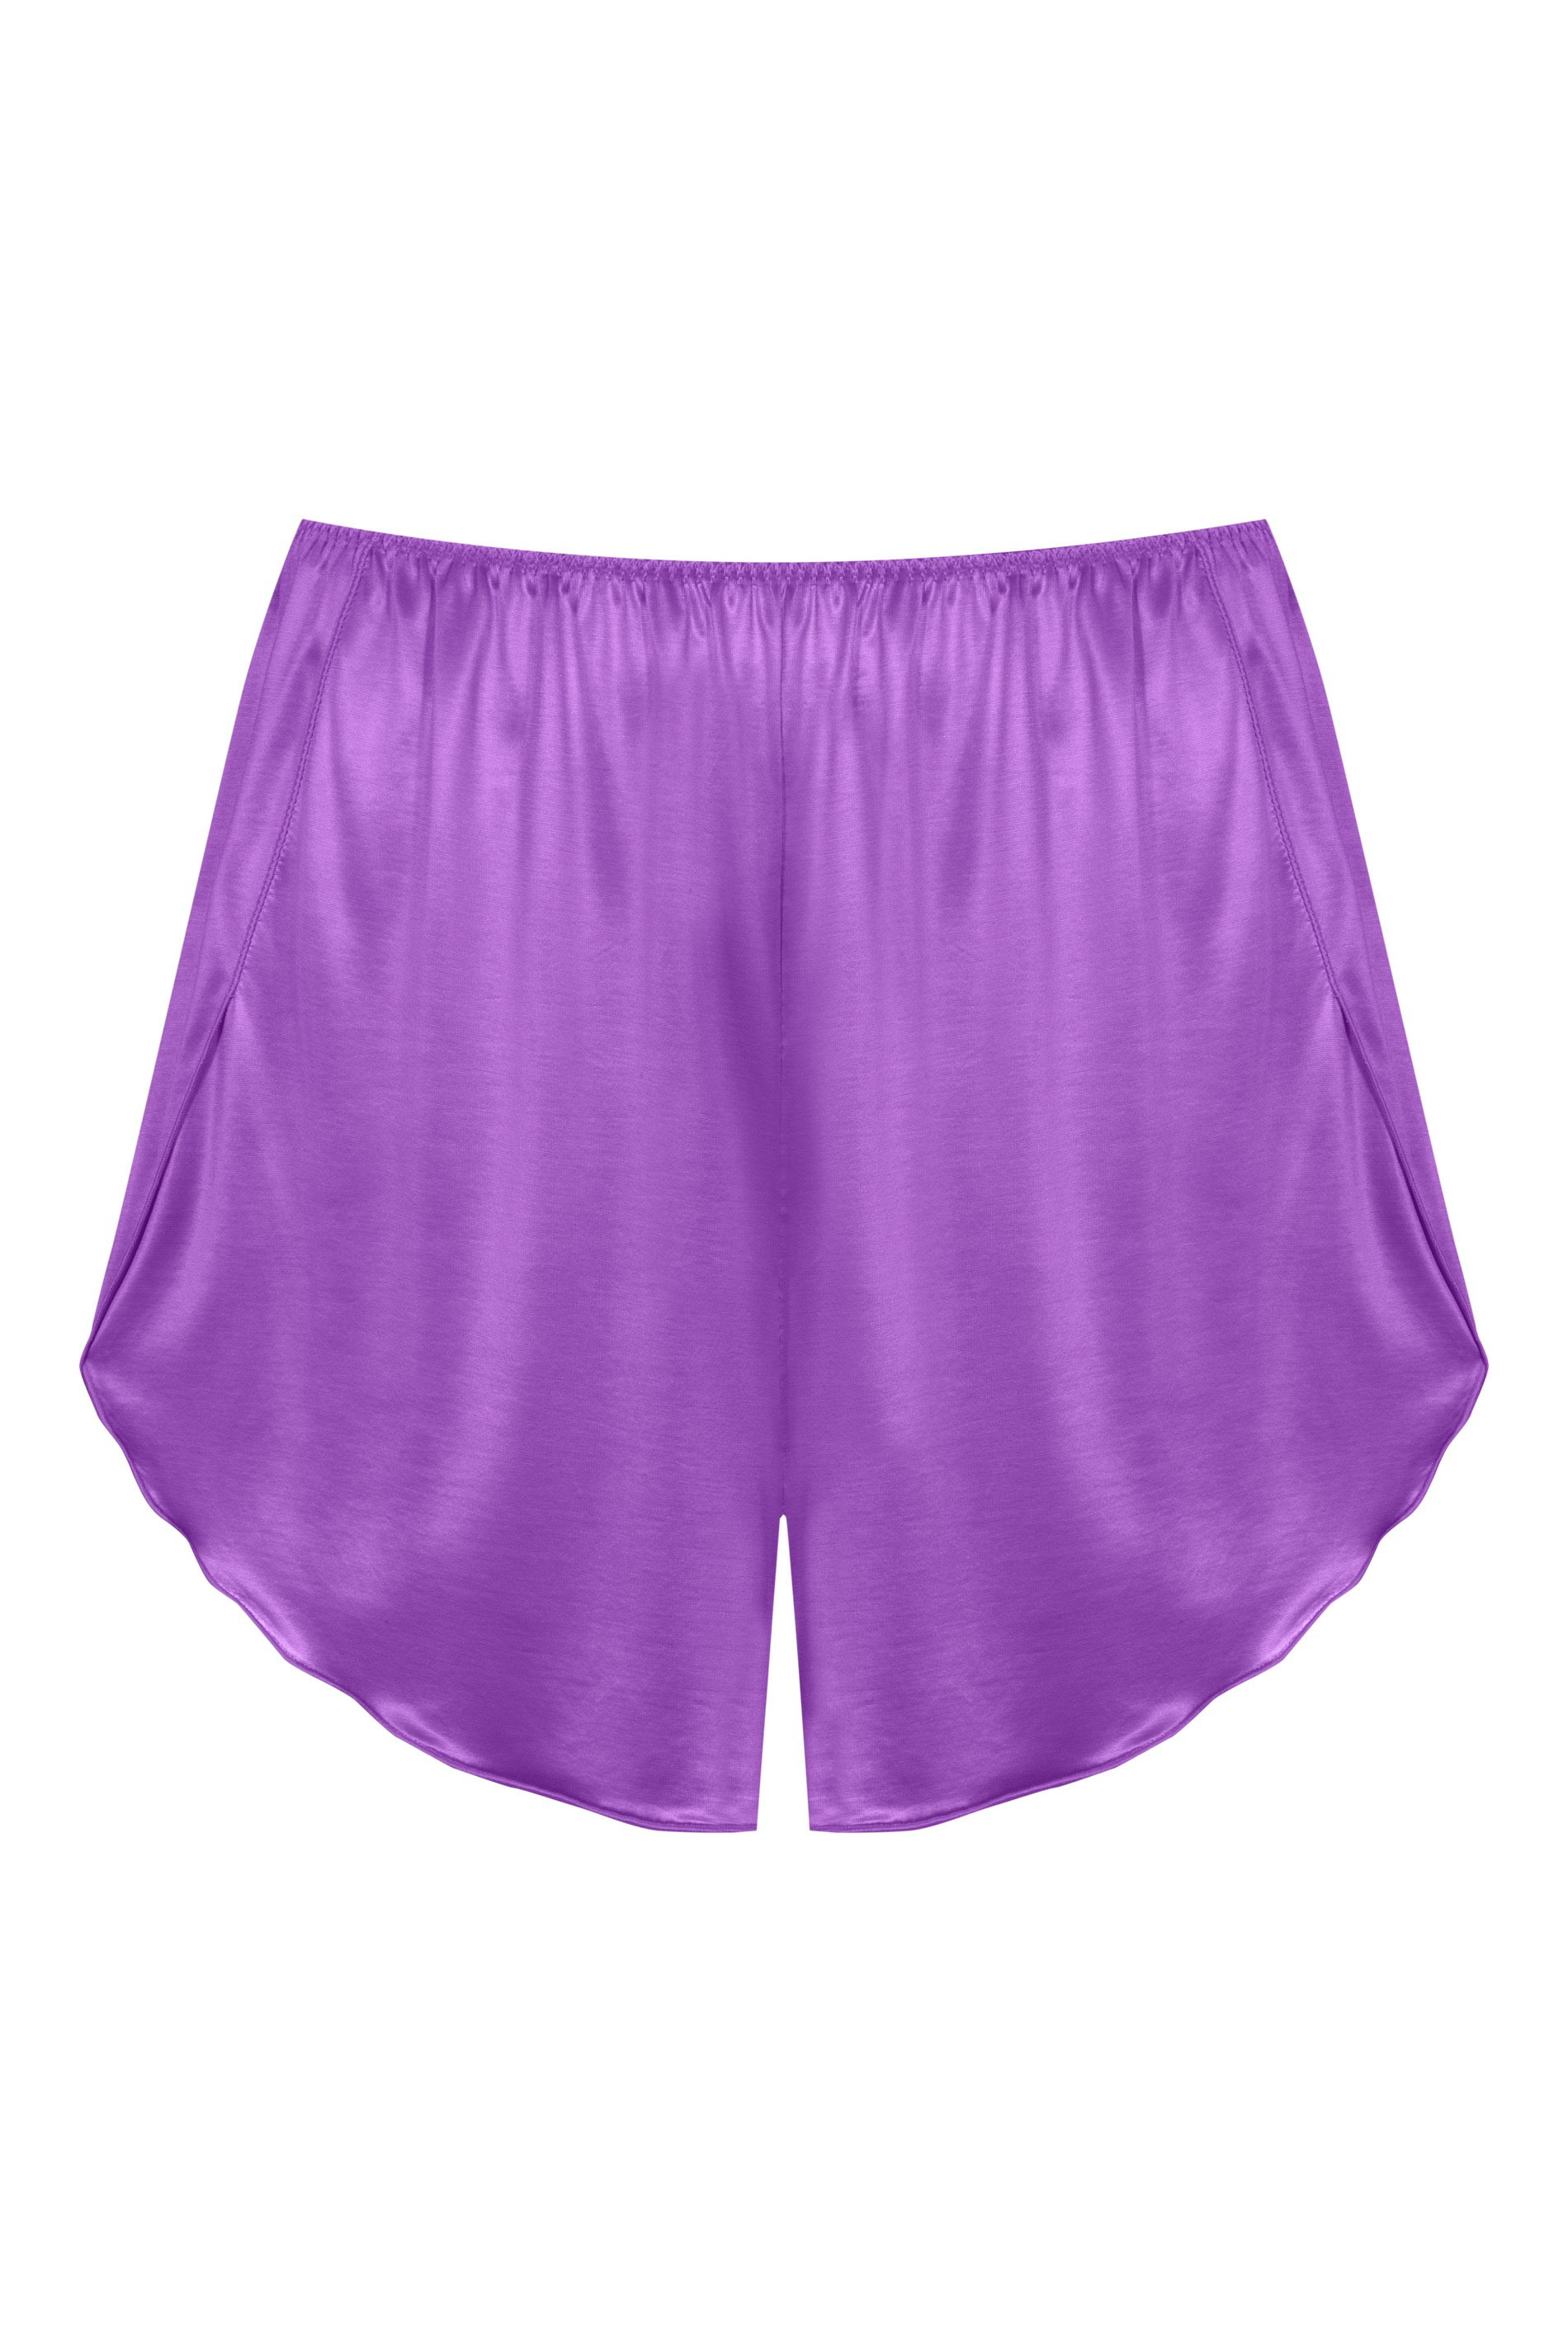 French knicker Serie Coco Uitknippen | mey®